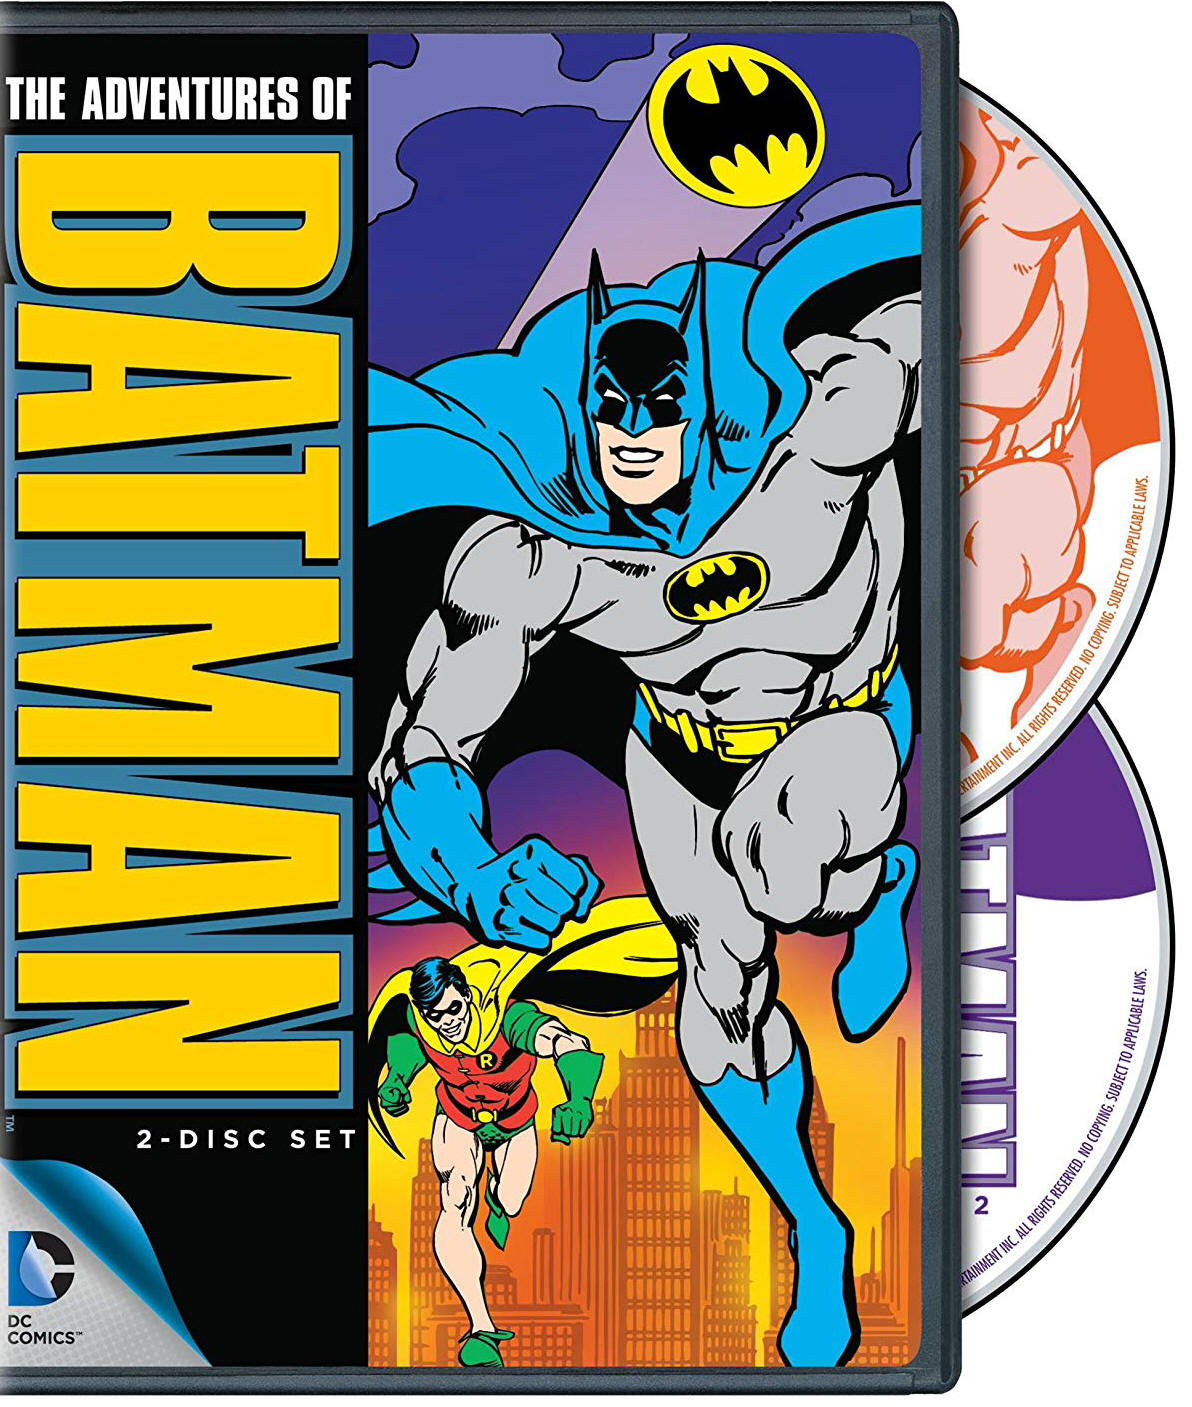 The Adventures of Batman - The Complete Series - DVD